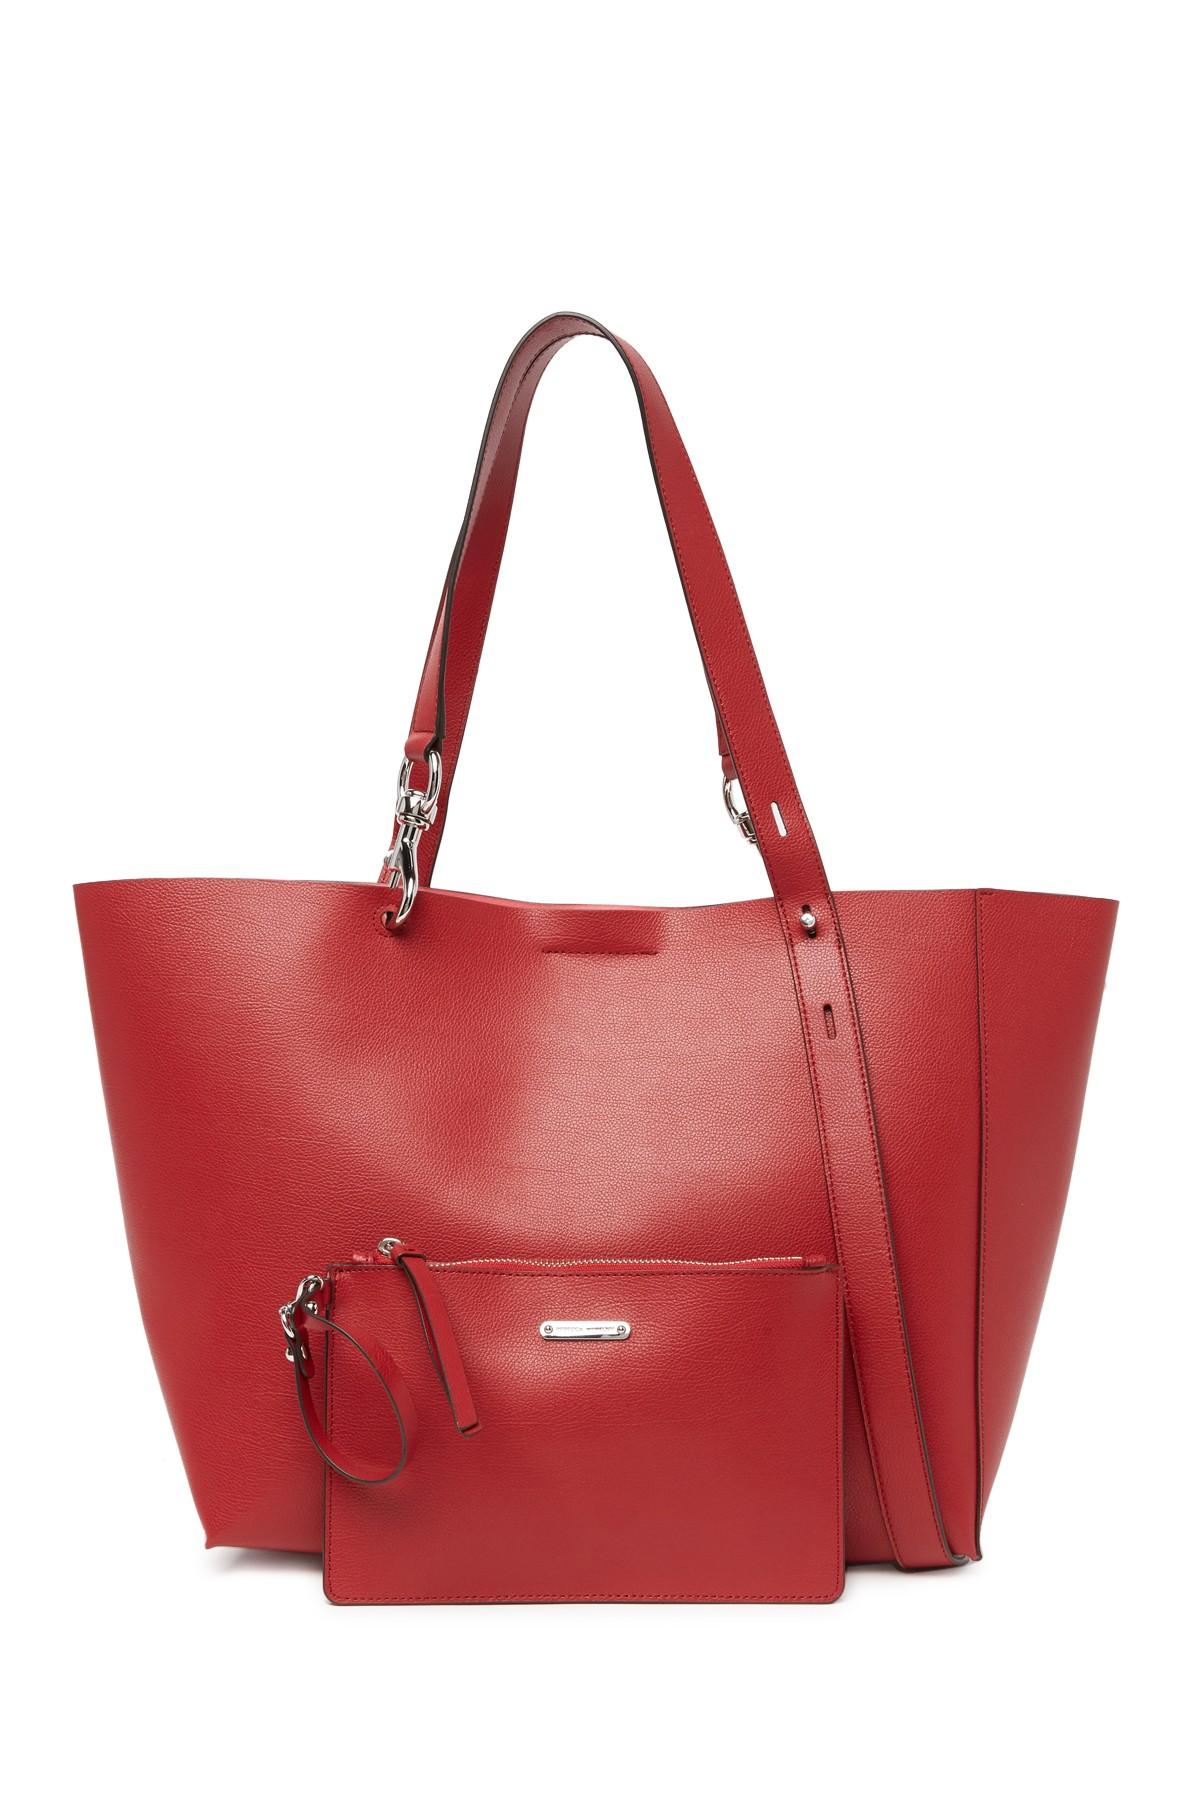 Rebecca Minkoff Stella Large Leather Tote Bag in Scarlet (Red) - Lyst